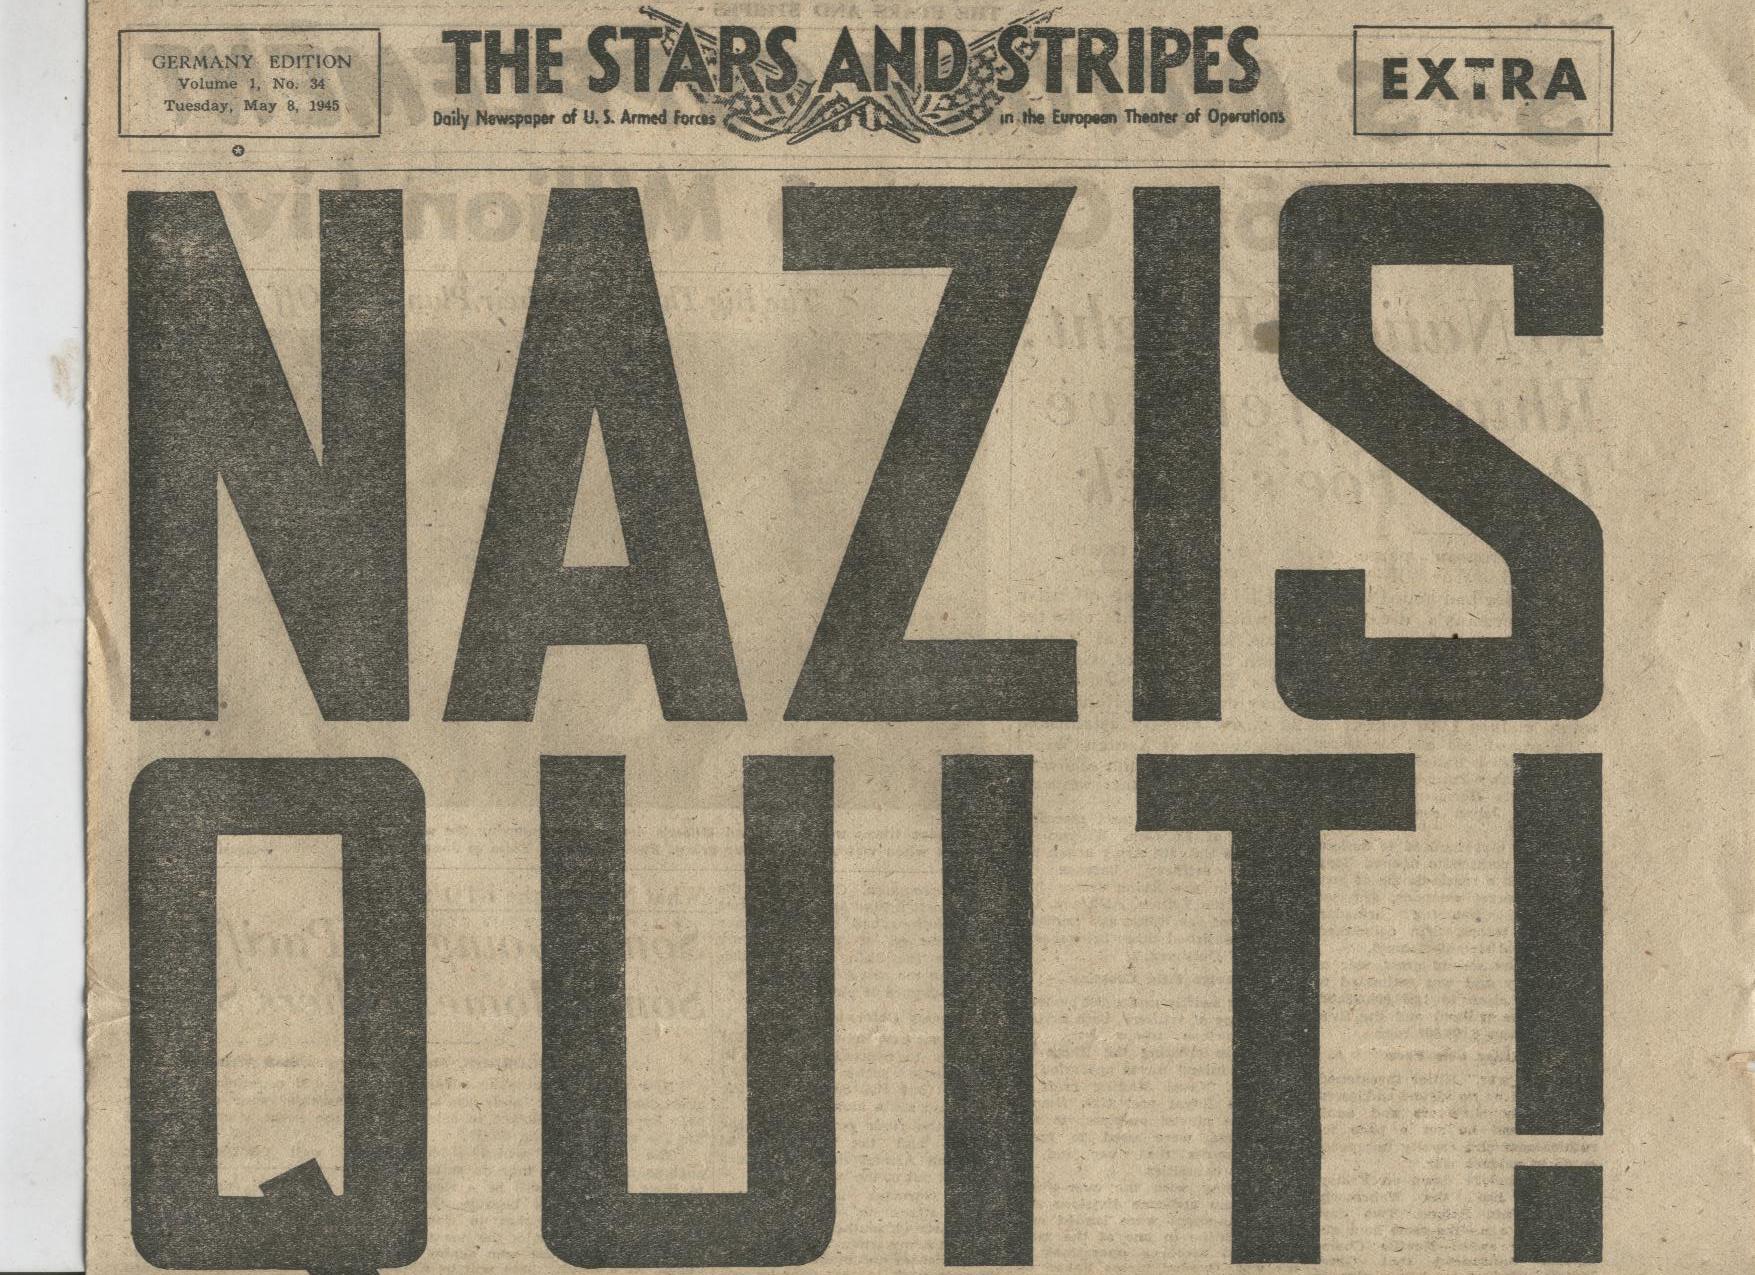 WWII edition of the Stars and Stripes newspaper for American troops in Europe for May 8th 1945 with